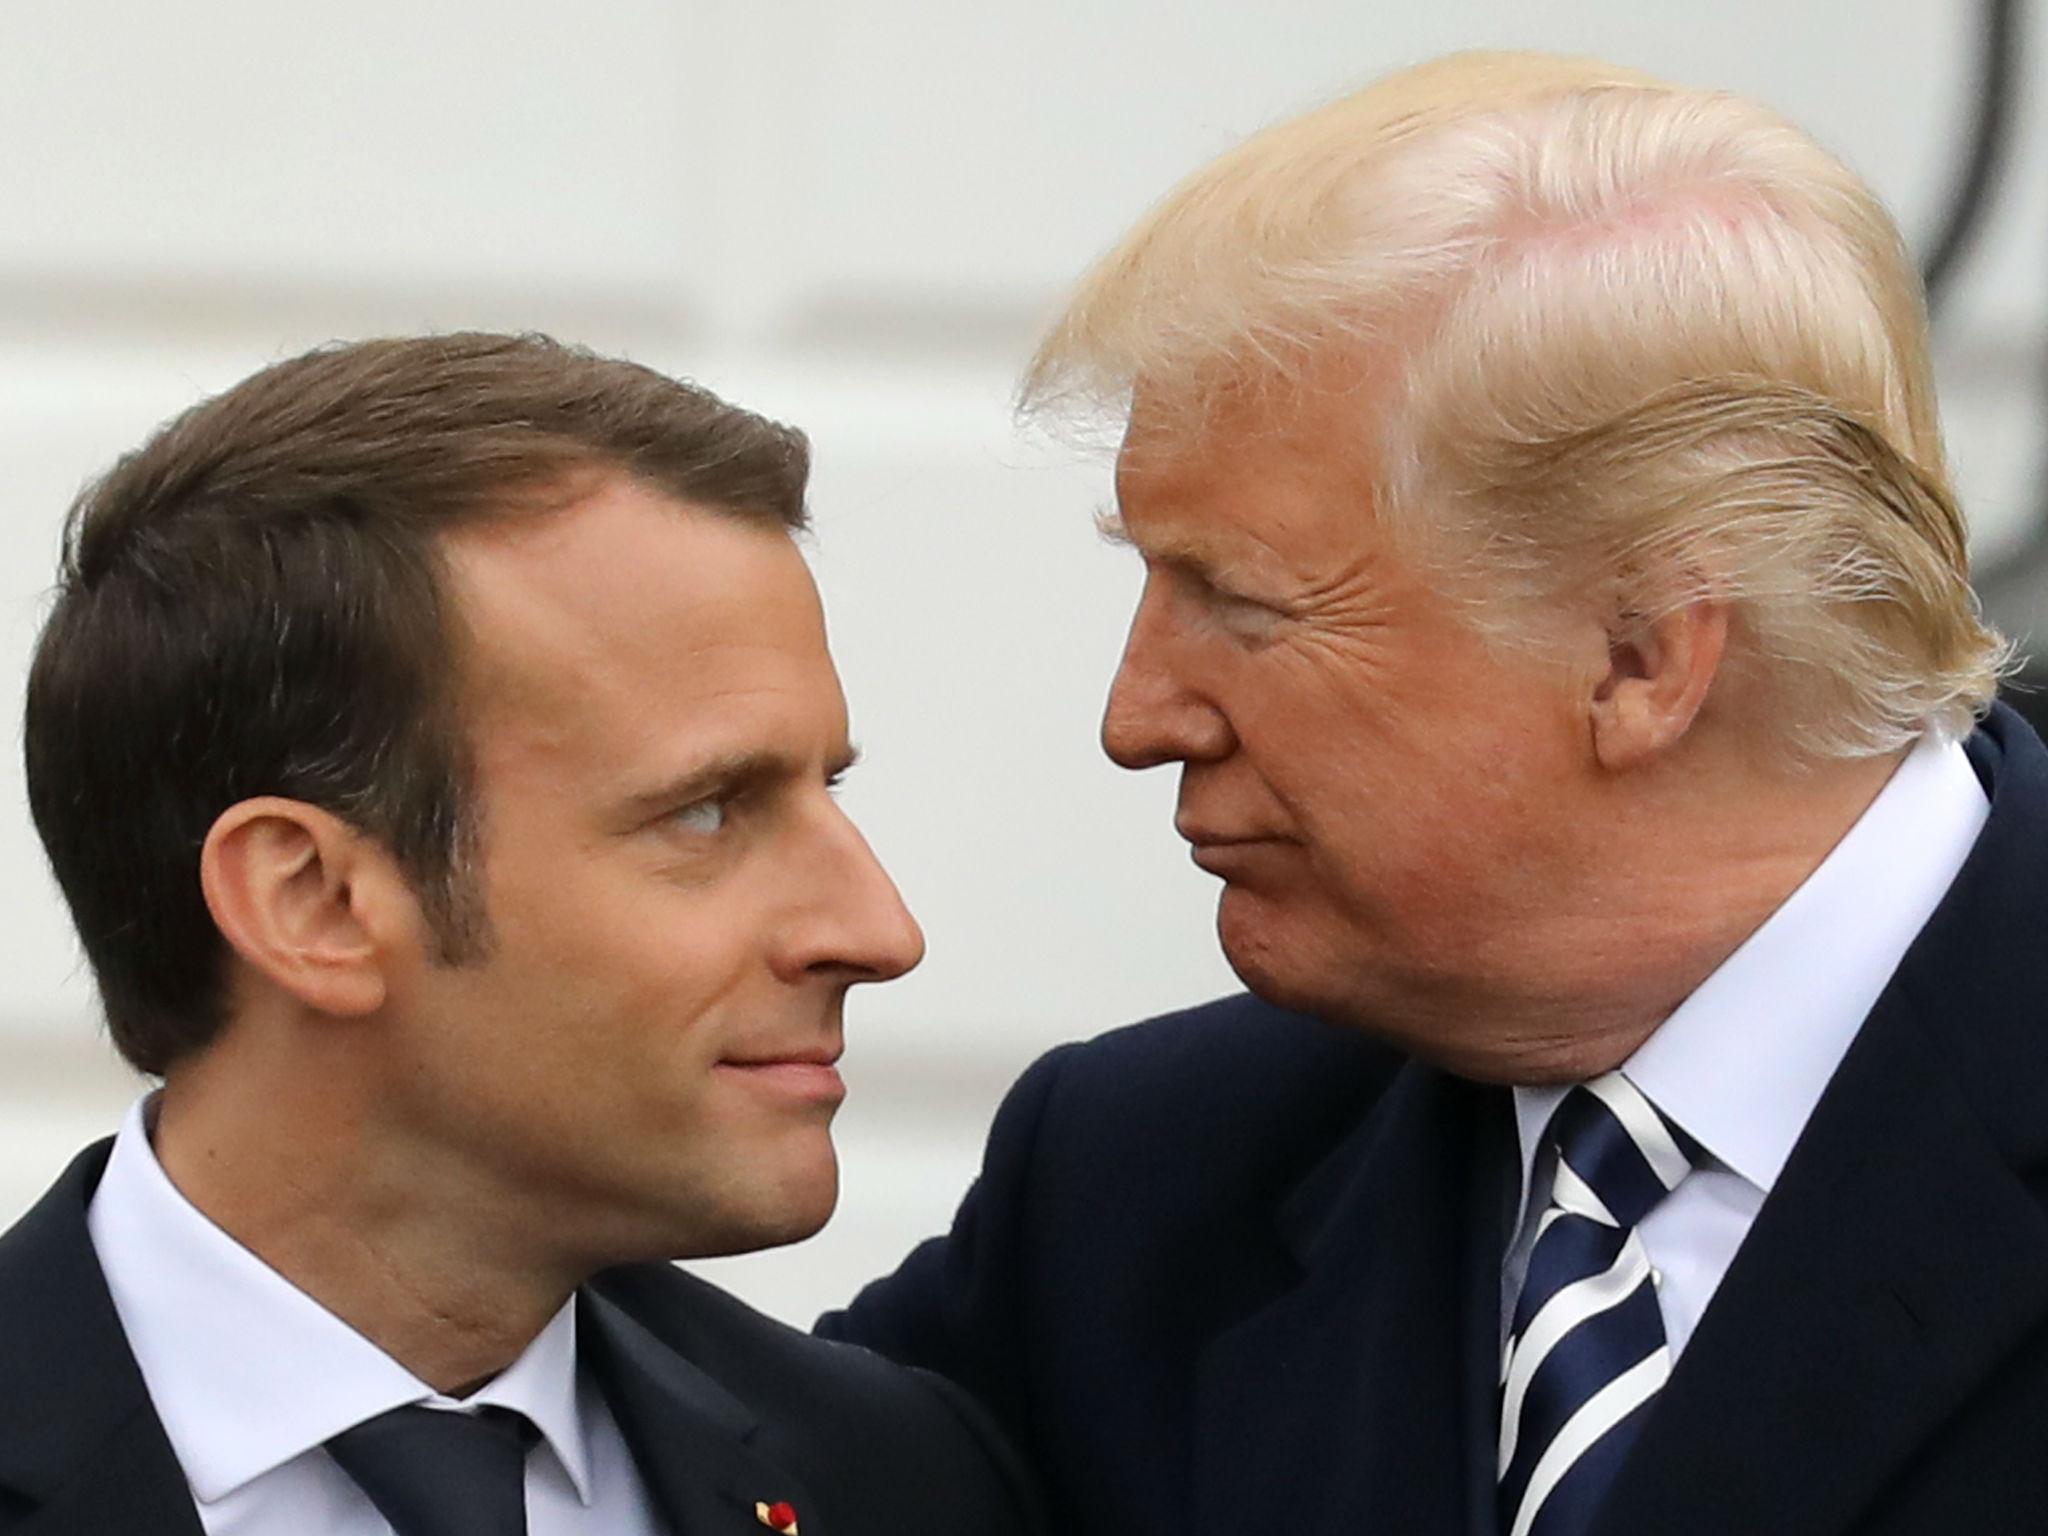 Hopefully Emmanuel Macron will succeed in convincing President Trump to sign a new nuclear deal to replace the JCPOA